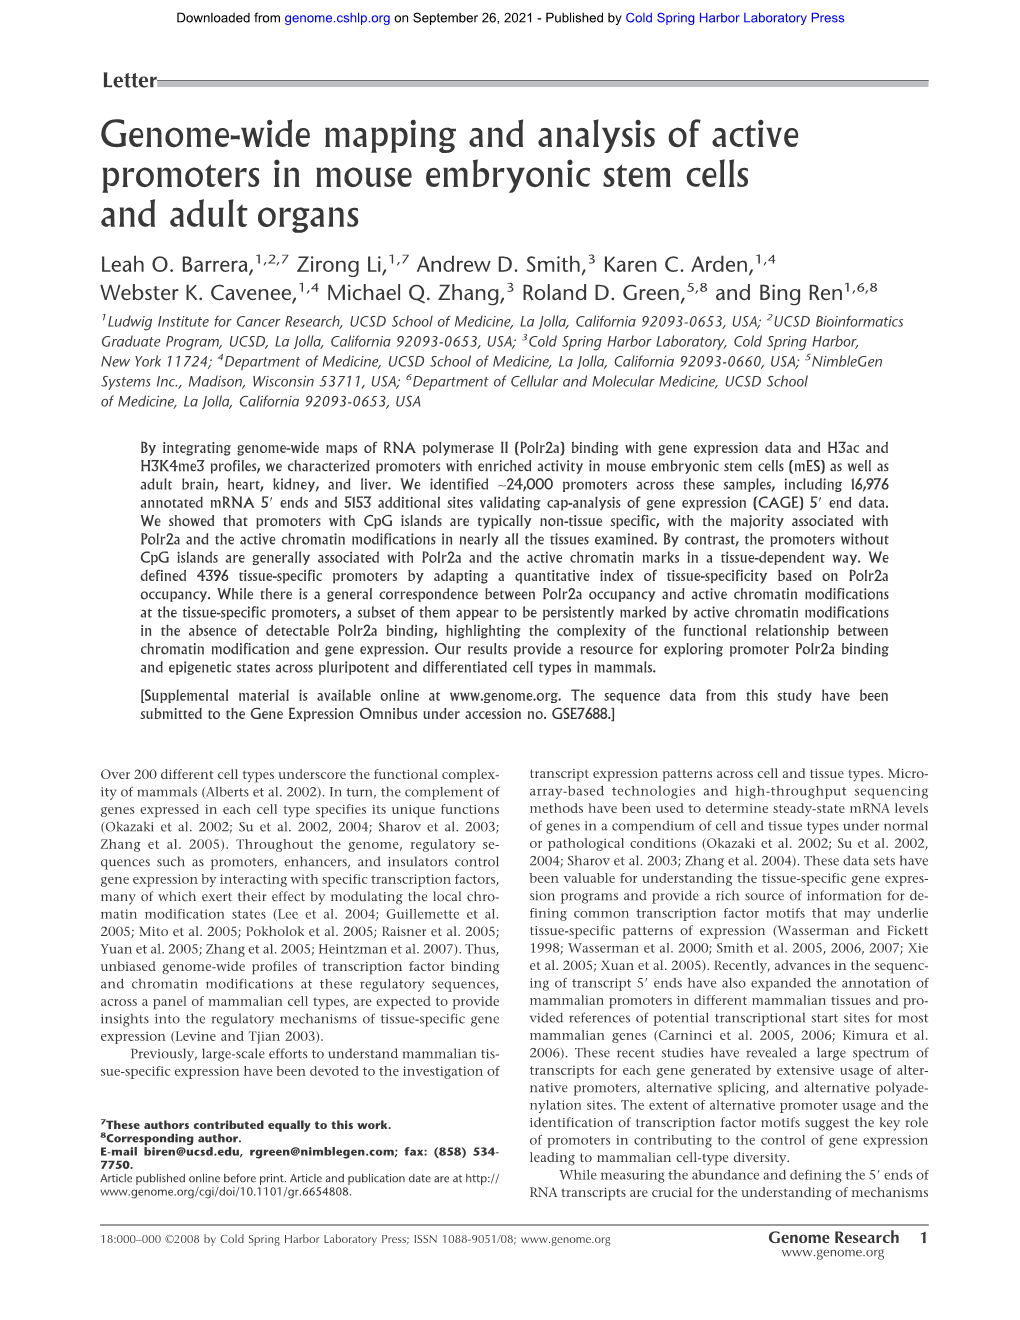 Genome-Wide Mapping and Analysis of Active Promoters in Mouse Embryonic Stem Cells and Adult Organs